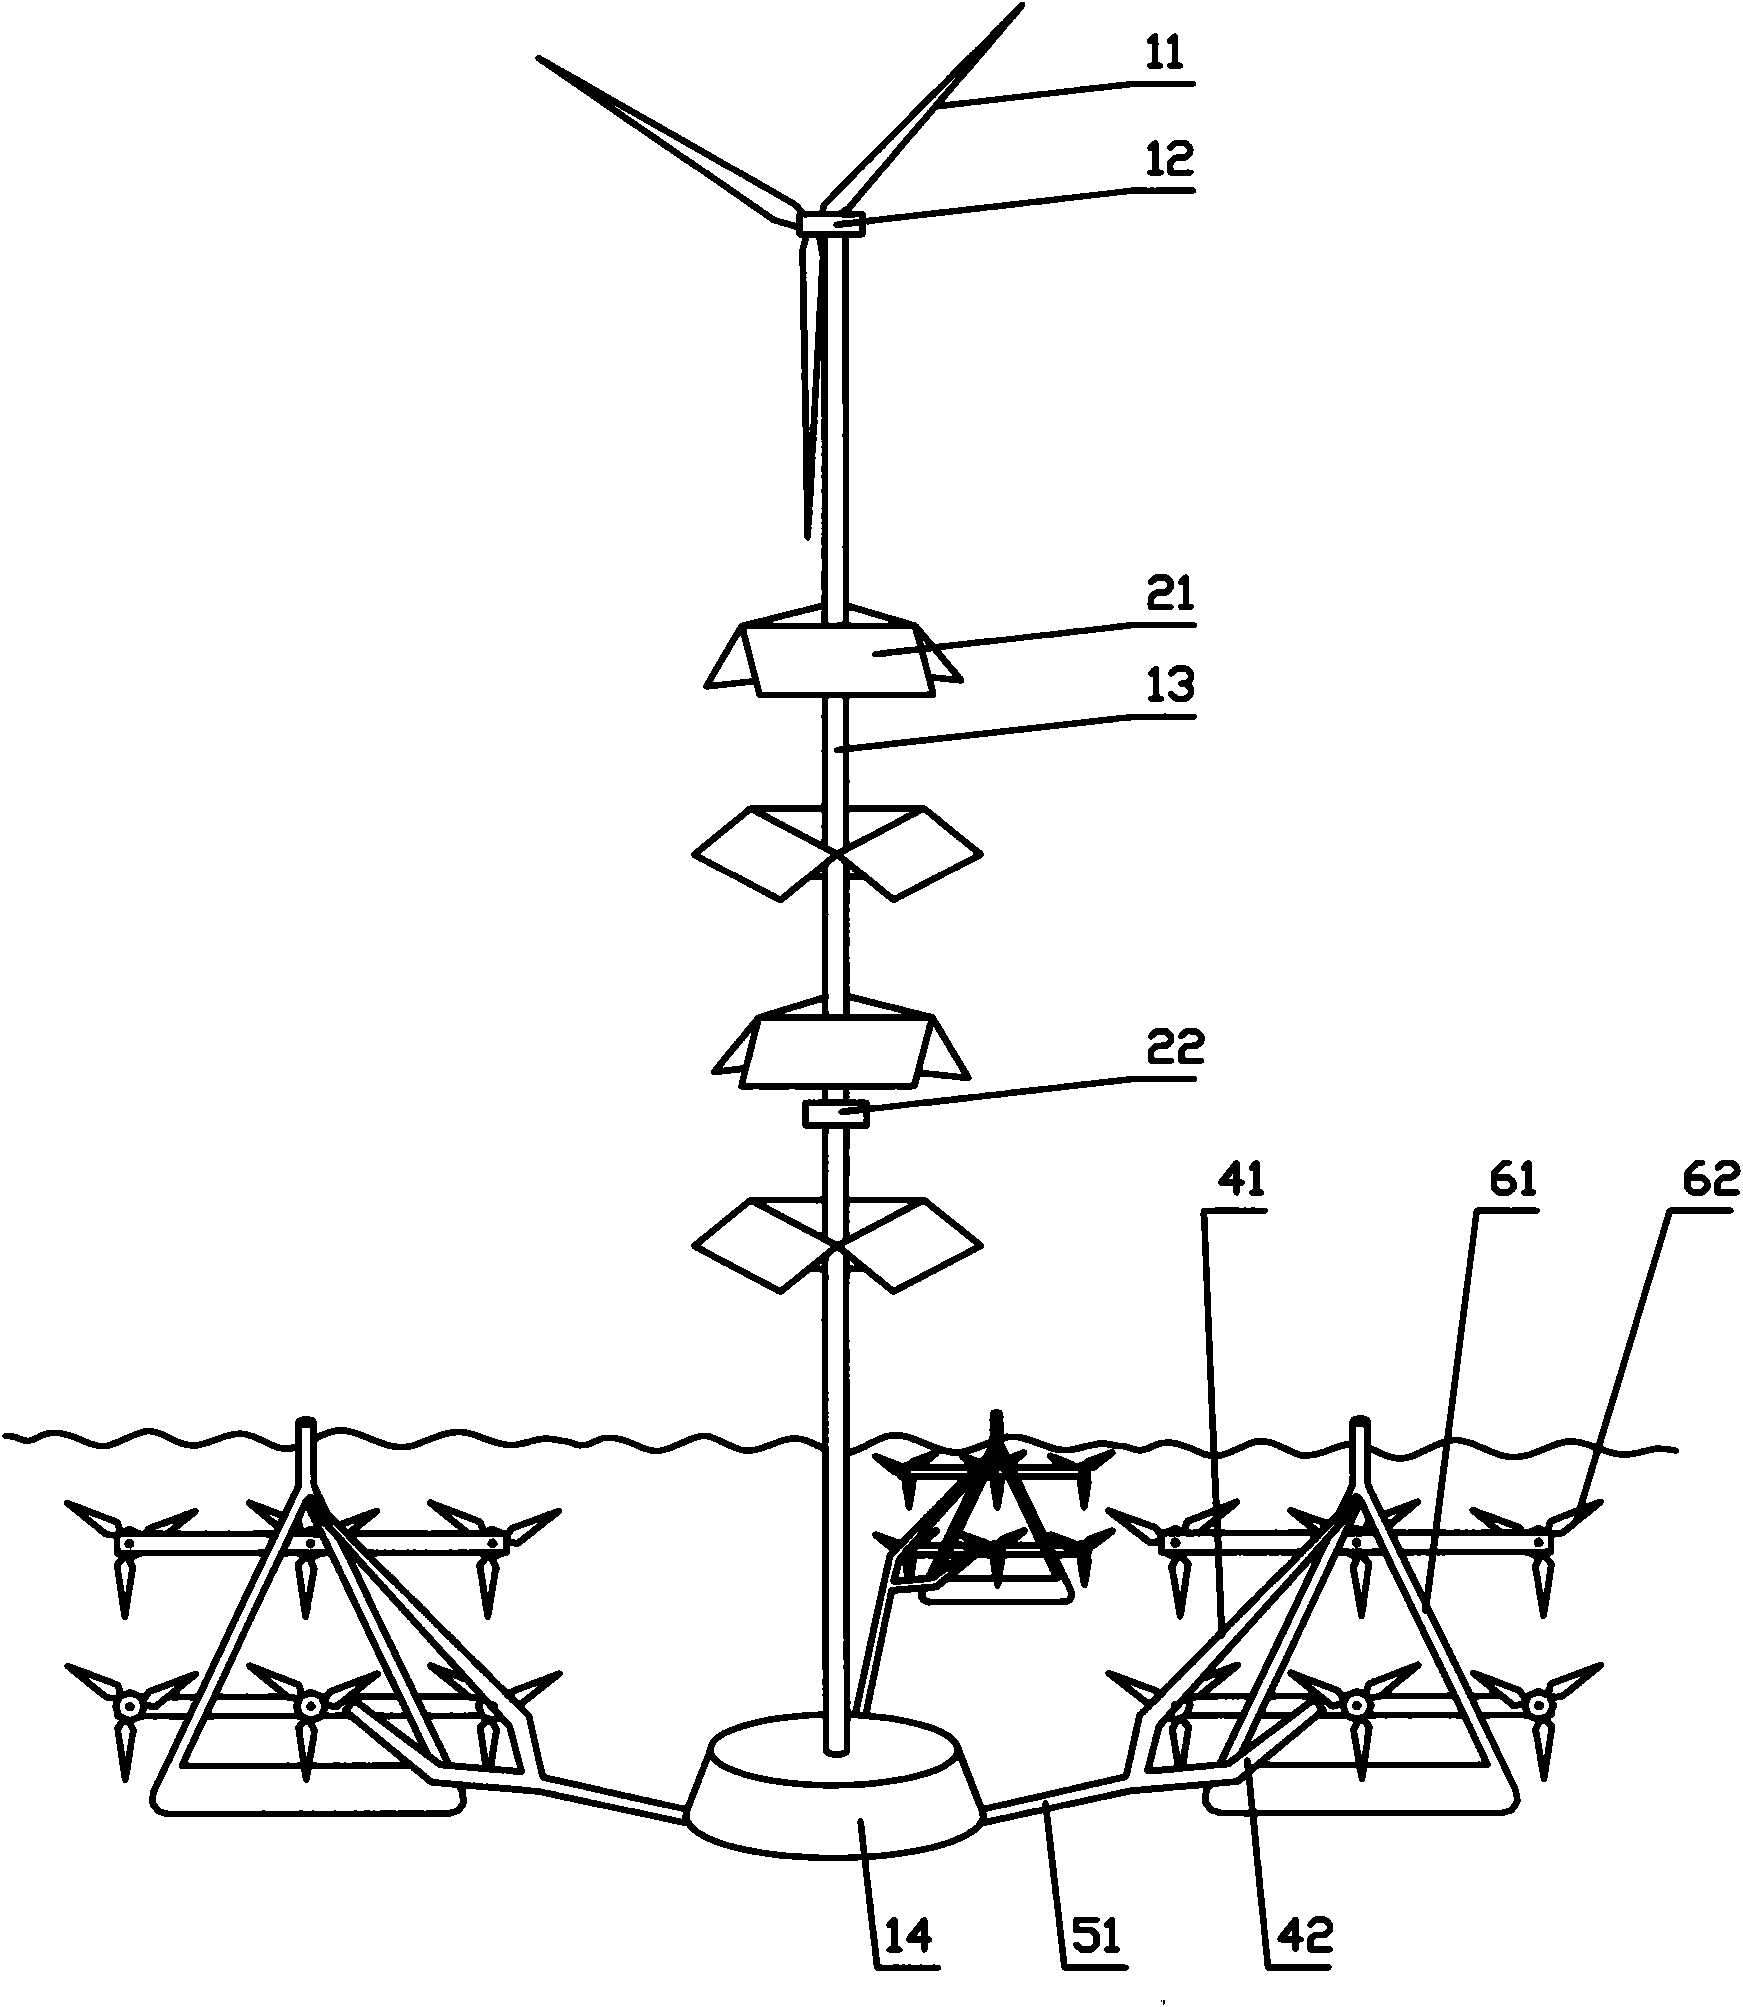 Integrated system for generating electricity by current, sea wave as well as tide kinetic energy and wind and solar energy